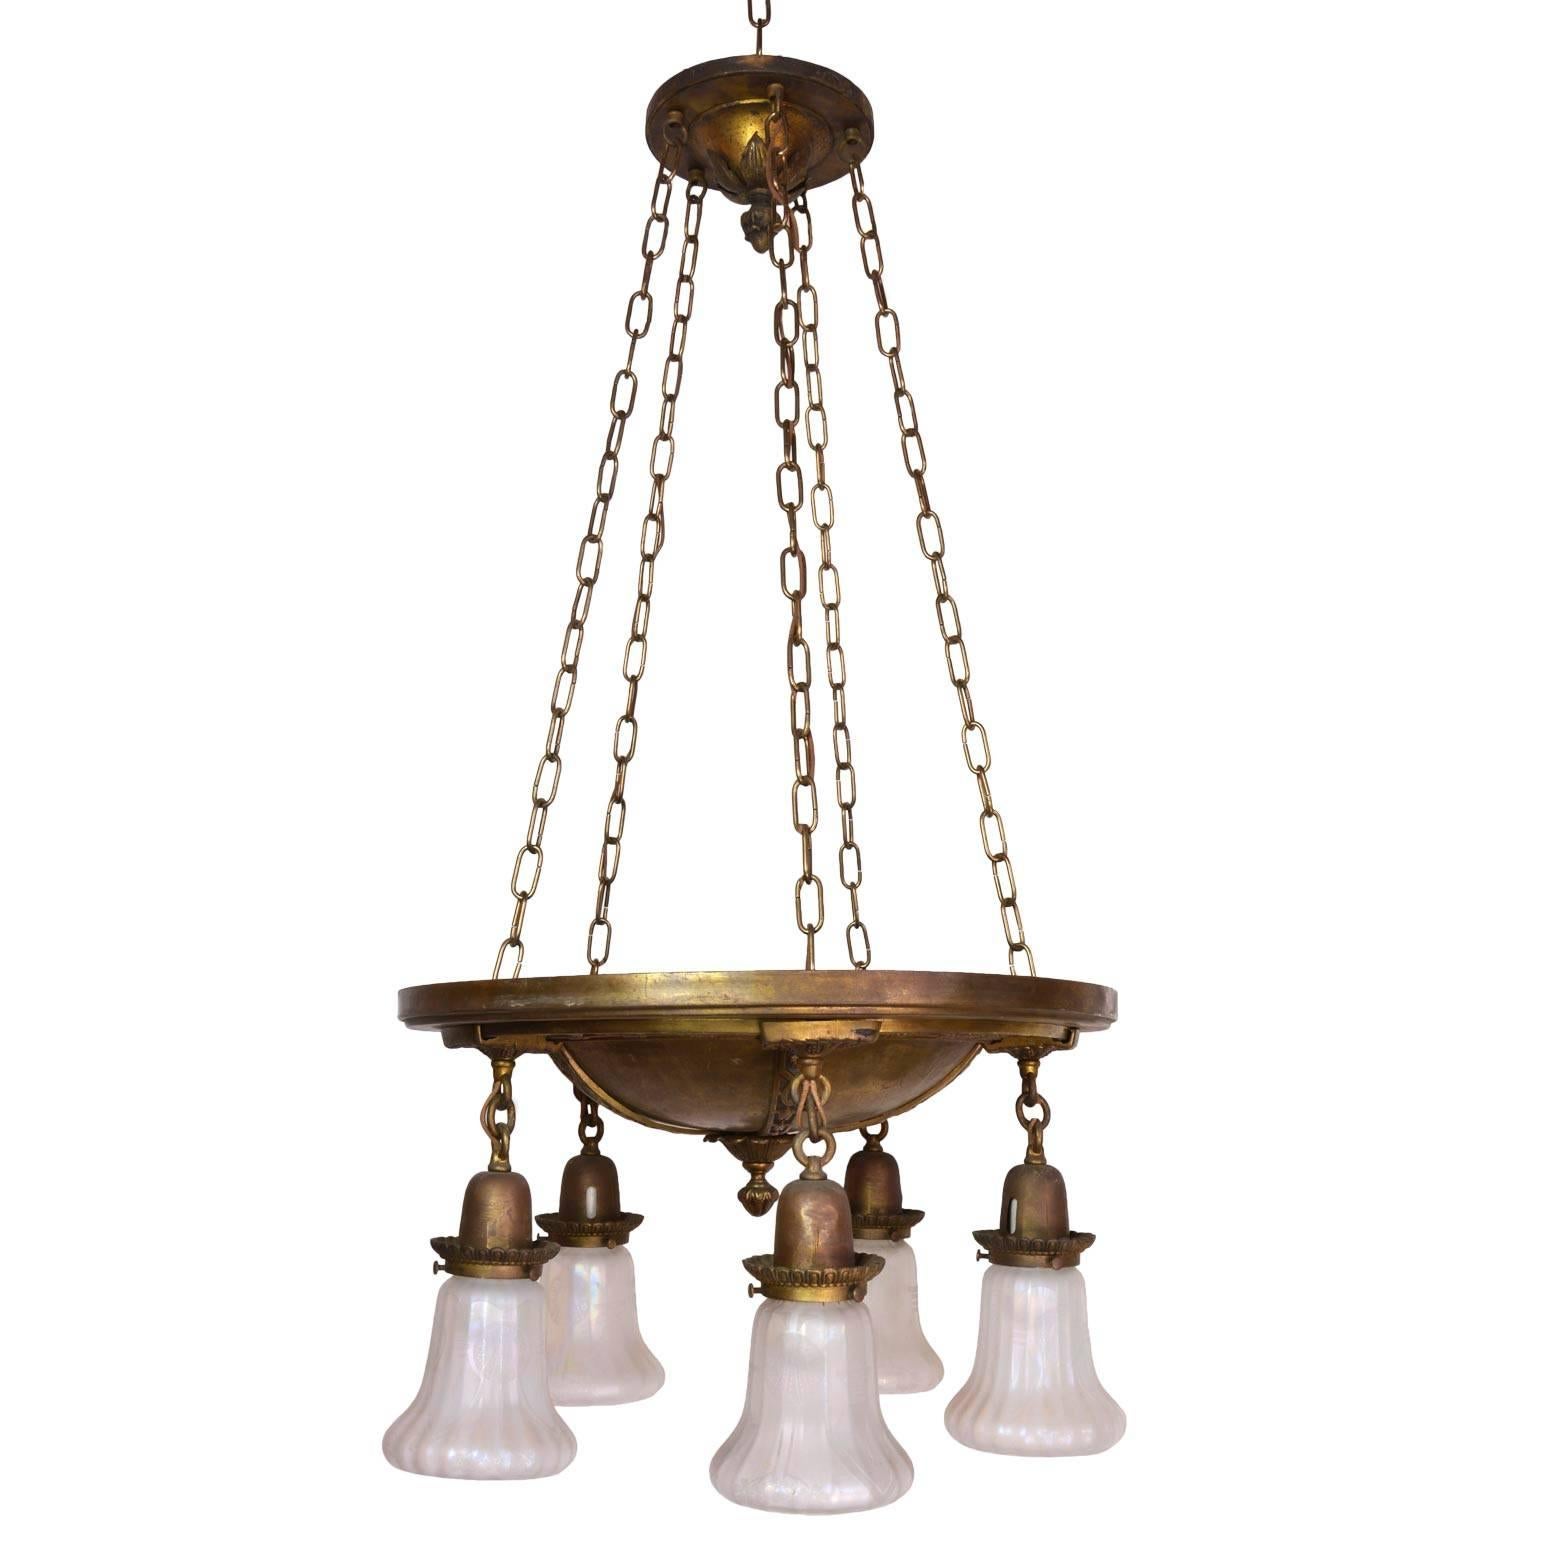 This lovely fixture is a great size for many rooms. It includes American Classical-style ornamentation in the brass  original shades, attributed to Steuben. When lit, the fixture reflects light from the rich brass patina, casting a warm glow over a